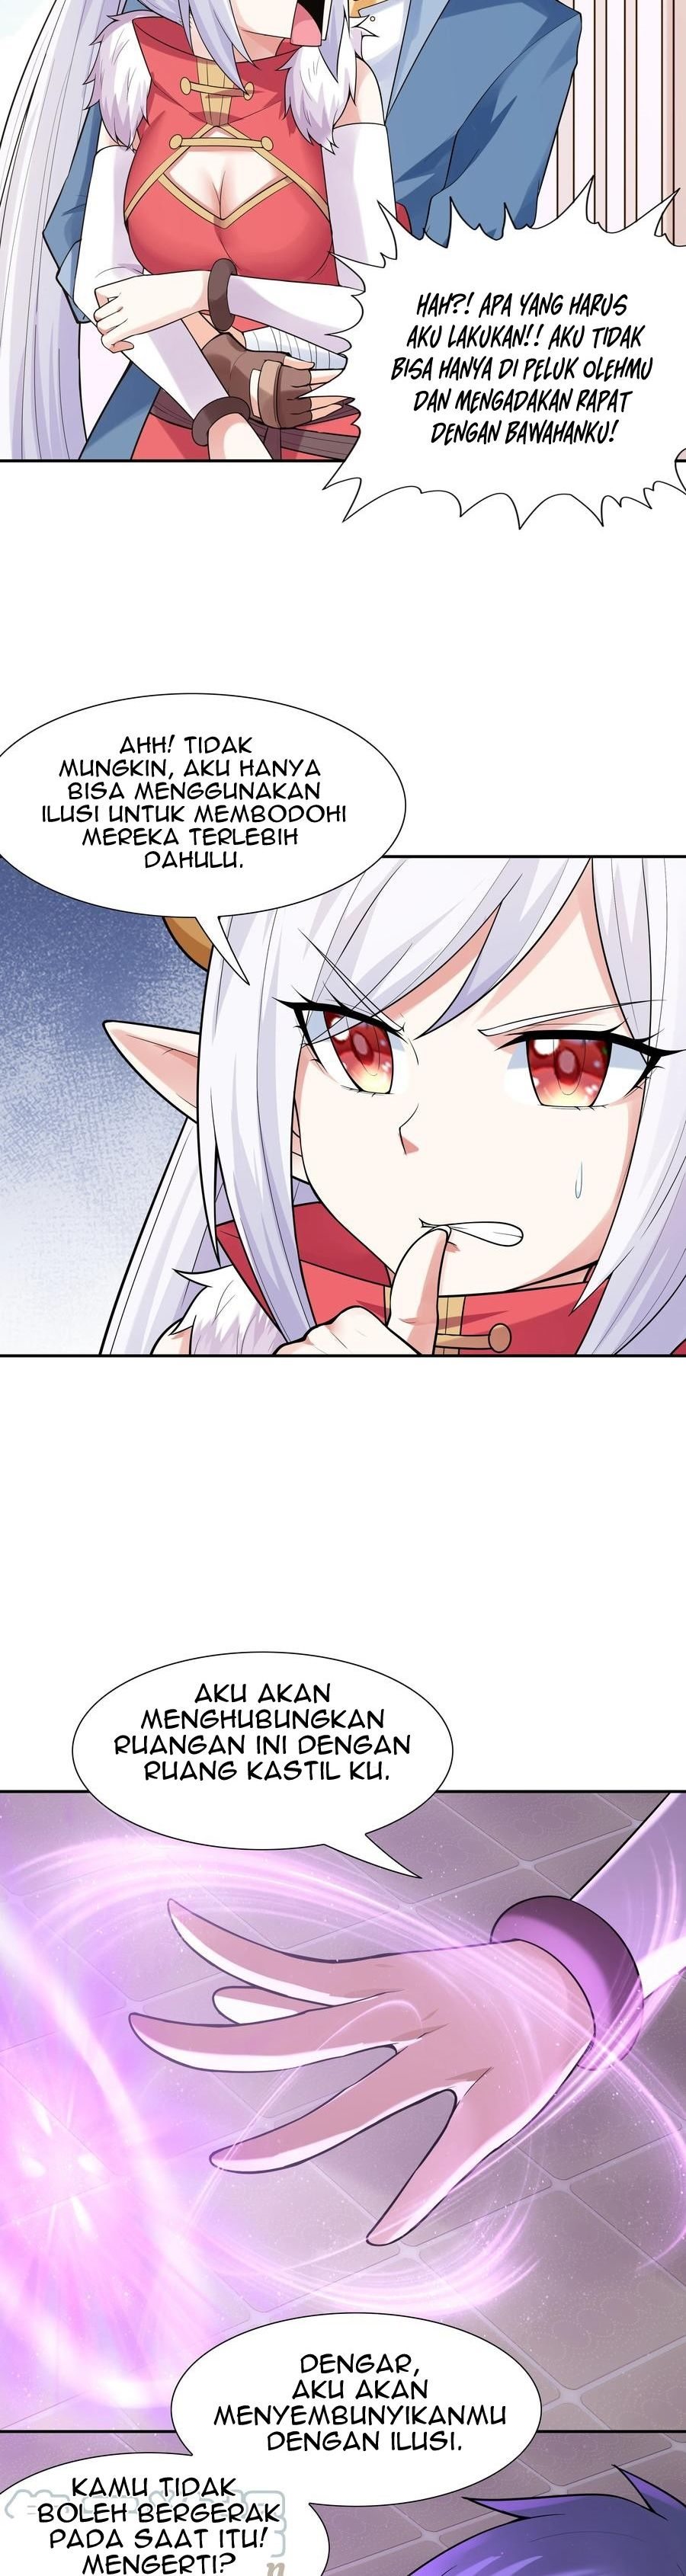 My Harem Is Entirely Female Demon Villains Chapter 23